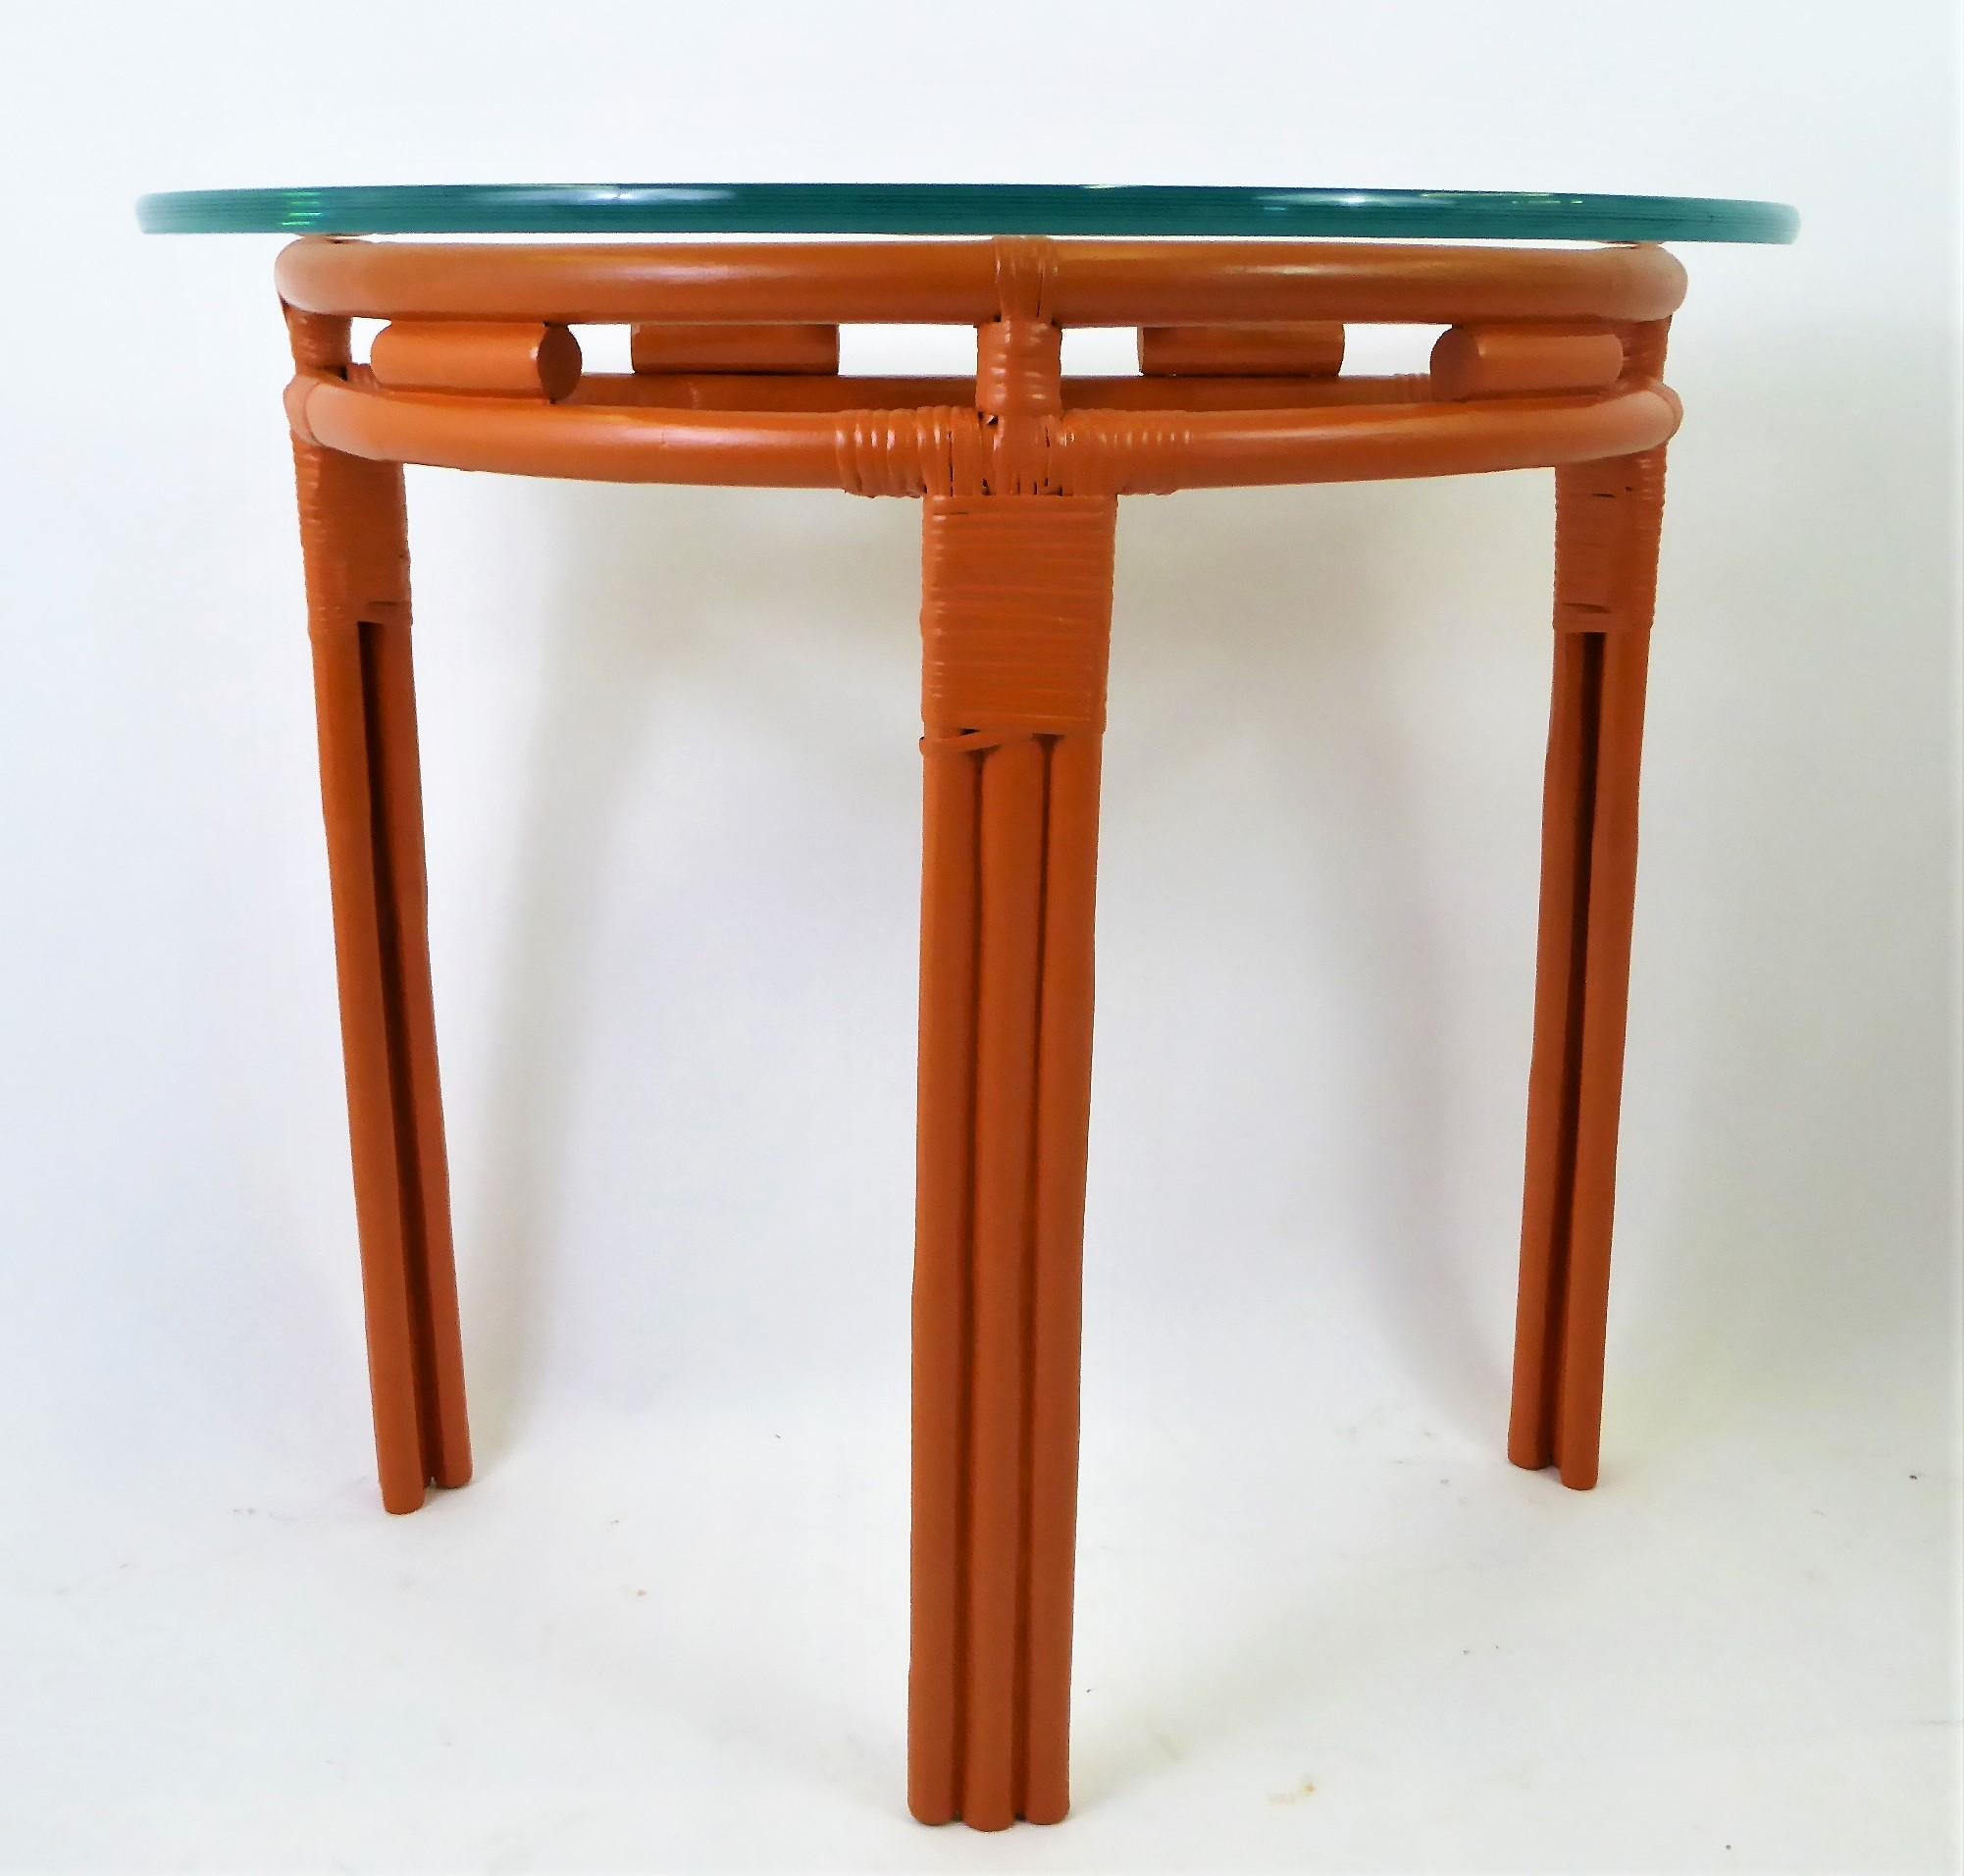 1940s Painted Rattan Demilune Glass Top Consoles in Hermes Orange 4